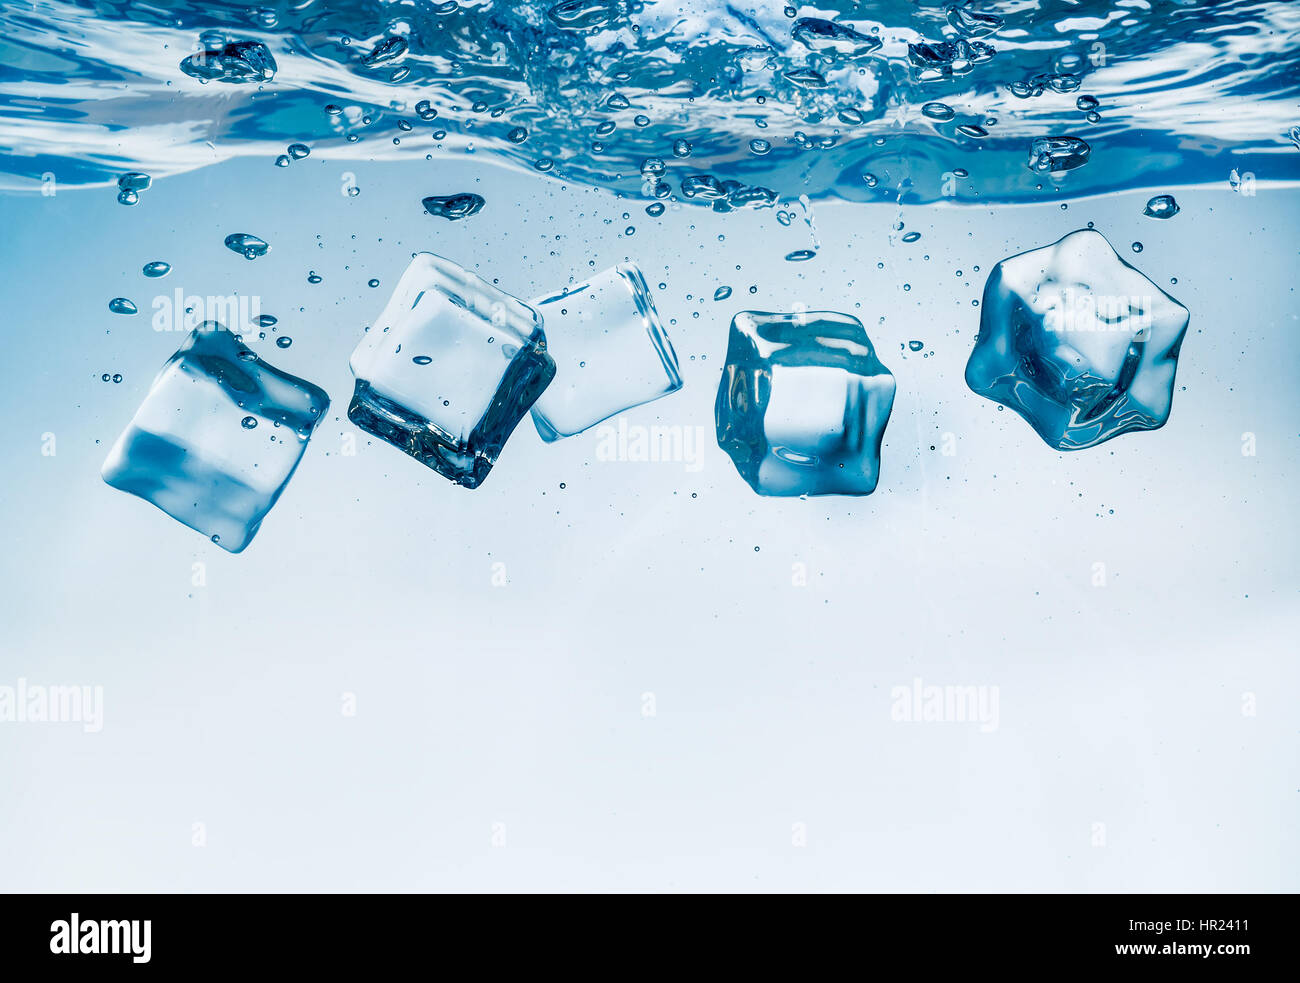 Ice cubes falling into the water sinking to the bottom. Abstract background. Stock Photo